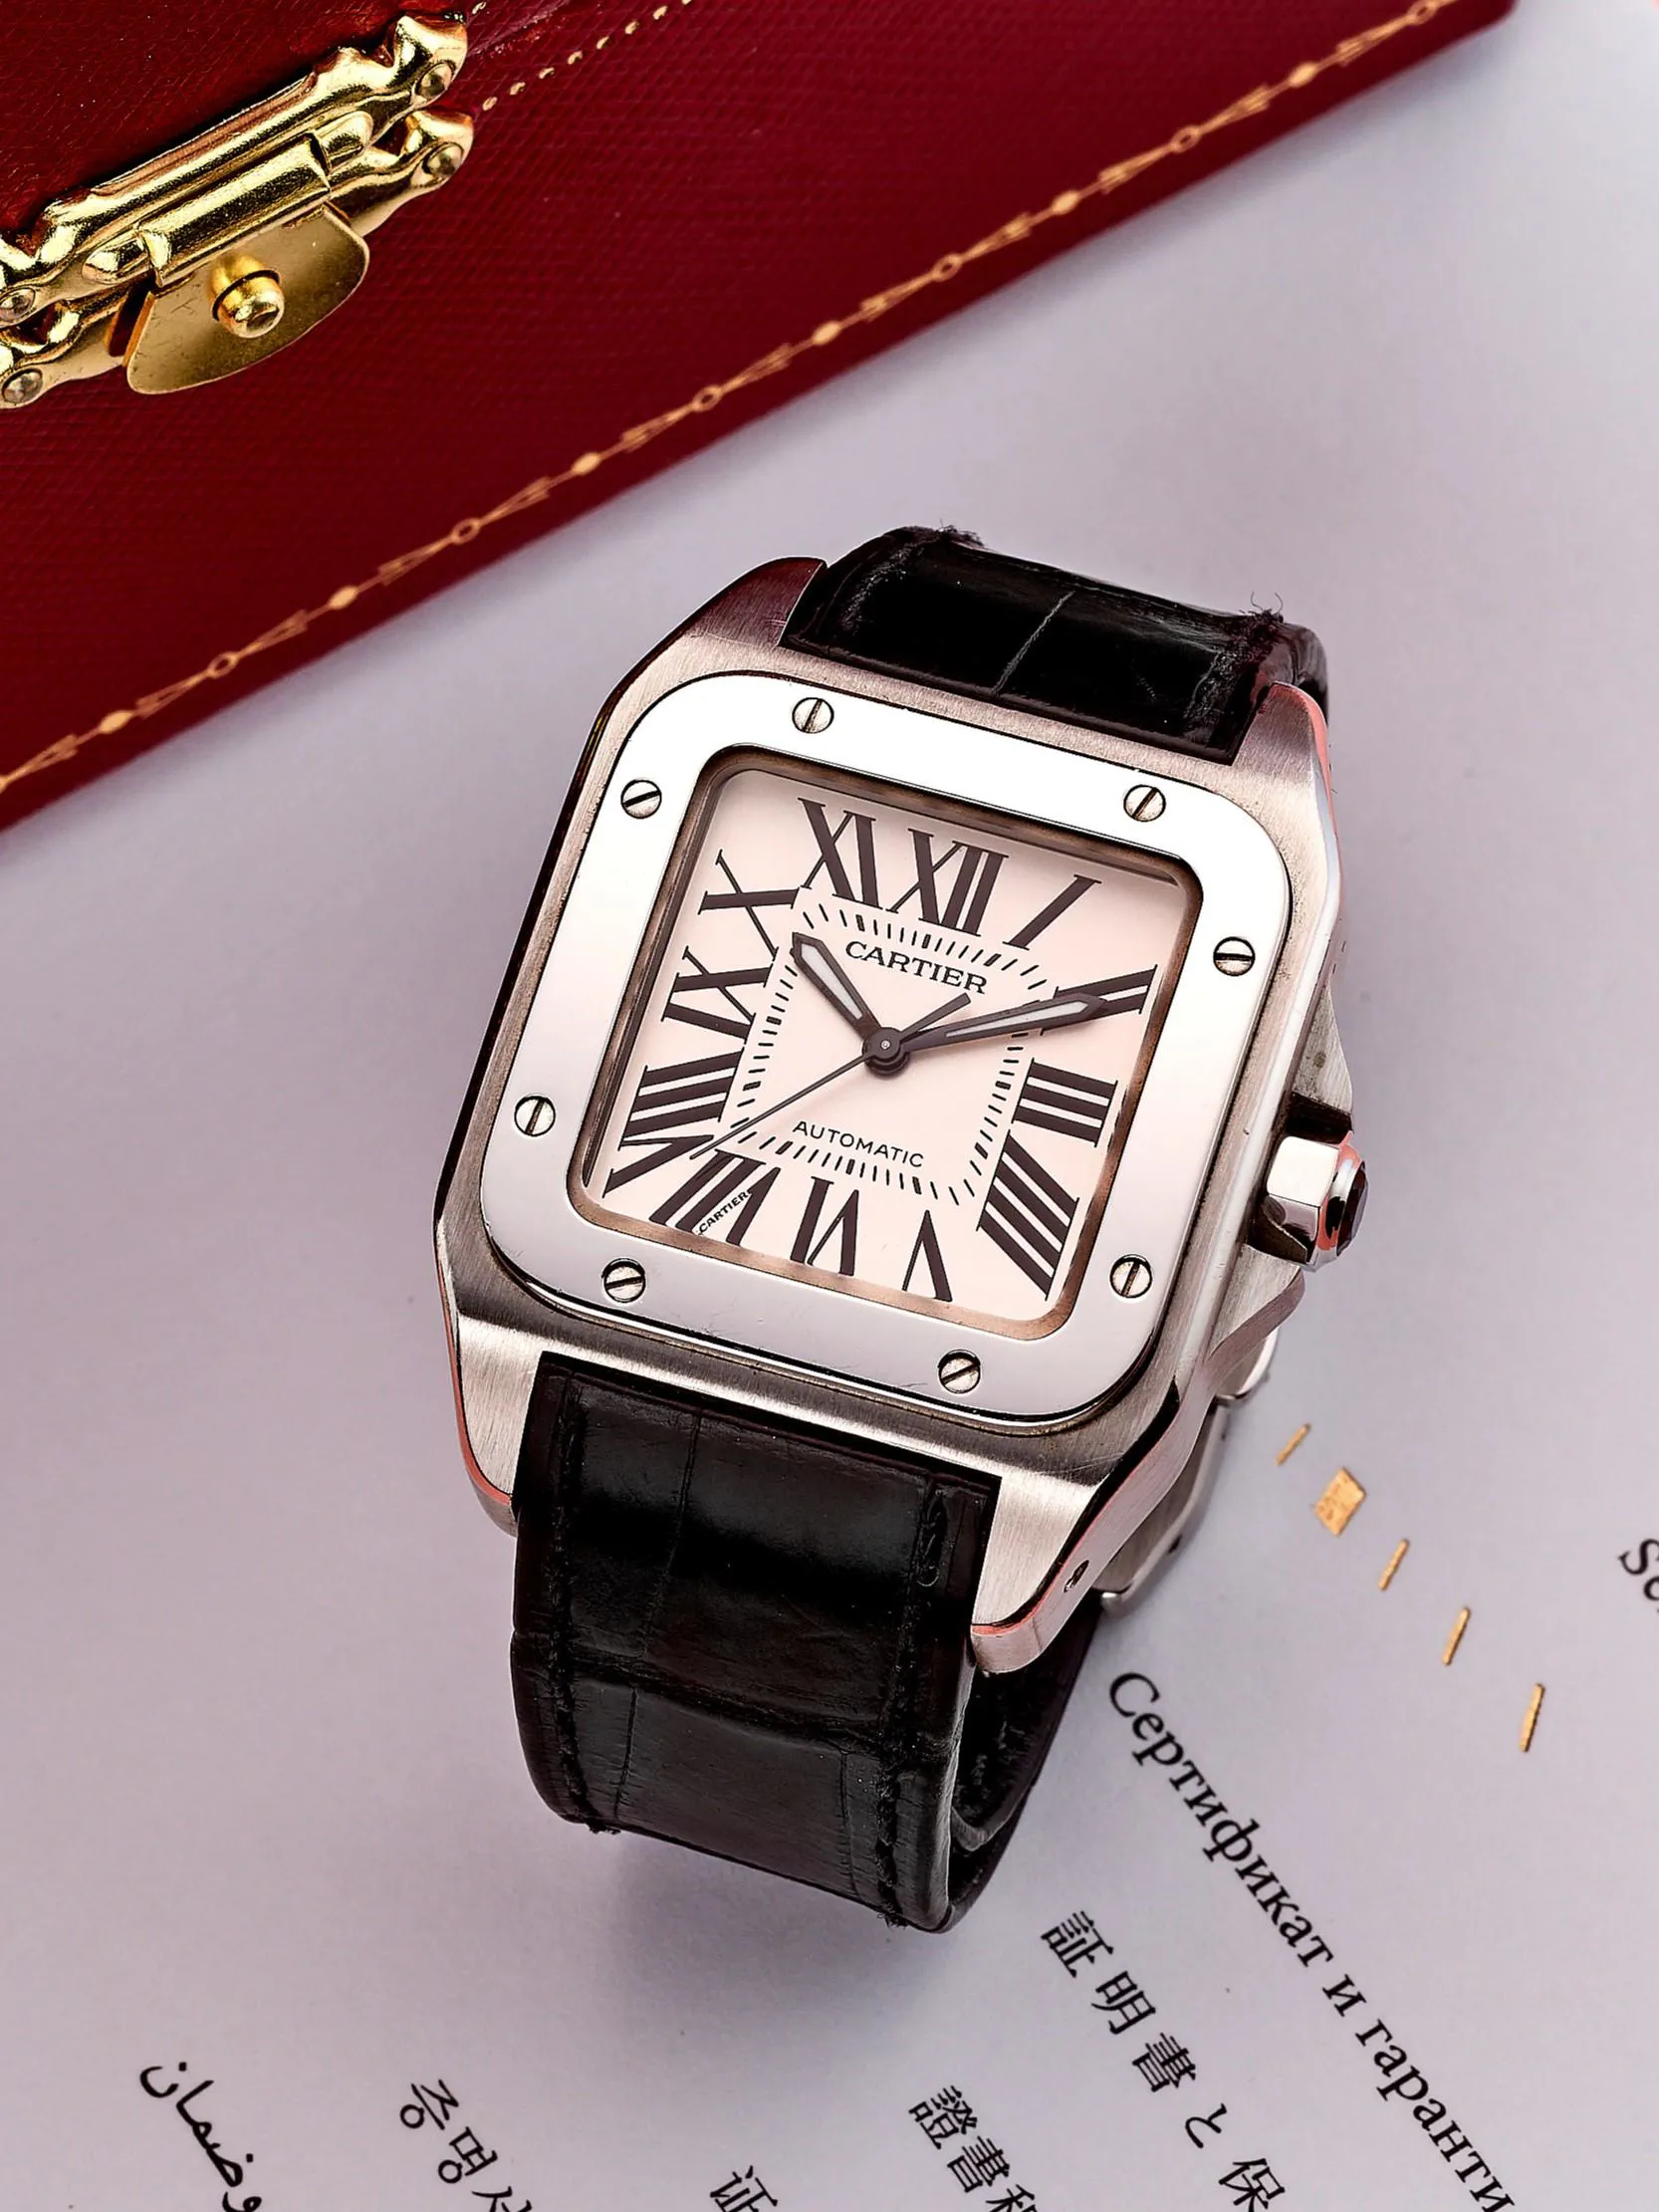 Cartier Santos 100 2878 33mm Stainless steel White